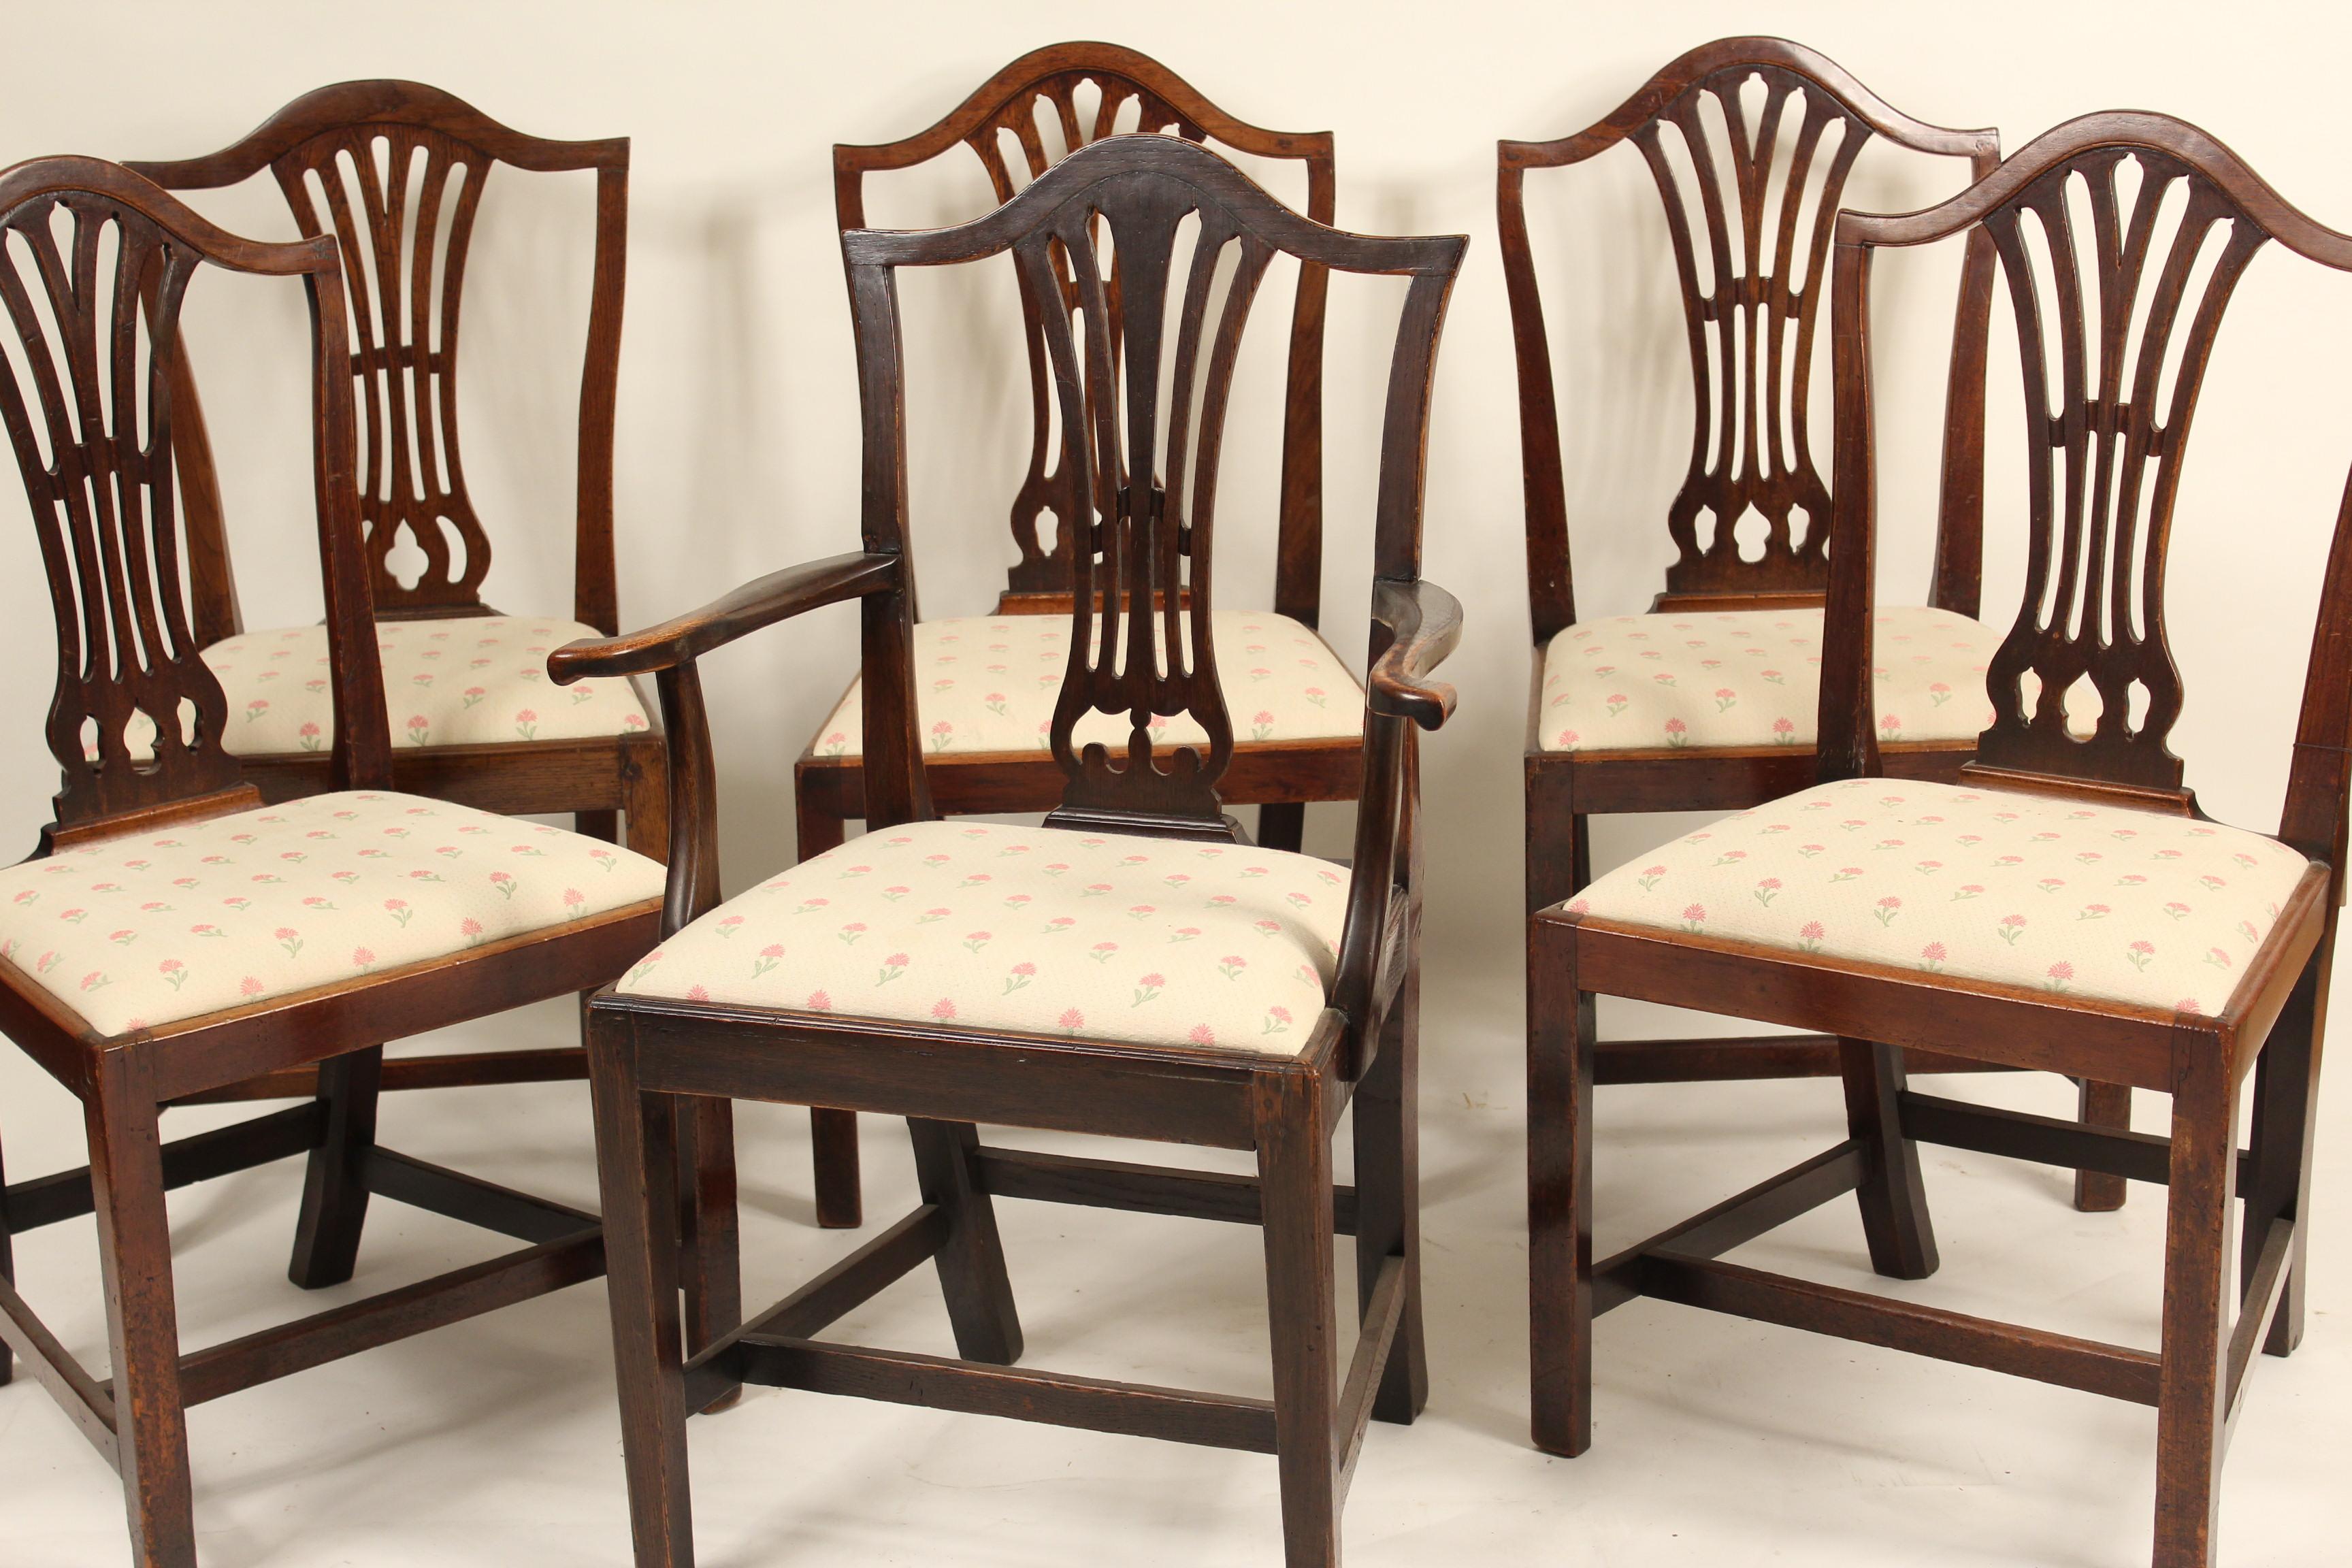 Matched set of 6 antique George III style dining room chairs, 5 side chairs and one armchair, early 19th century. The armchair is oak, one side chair is elm the other 4 side chairs are mahogany. All chairs have nice old color. The armchair measures,